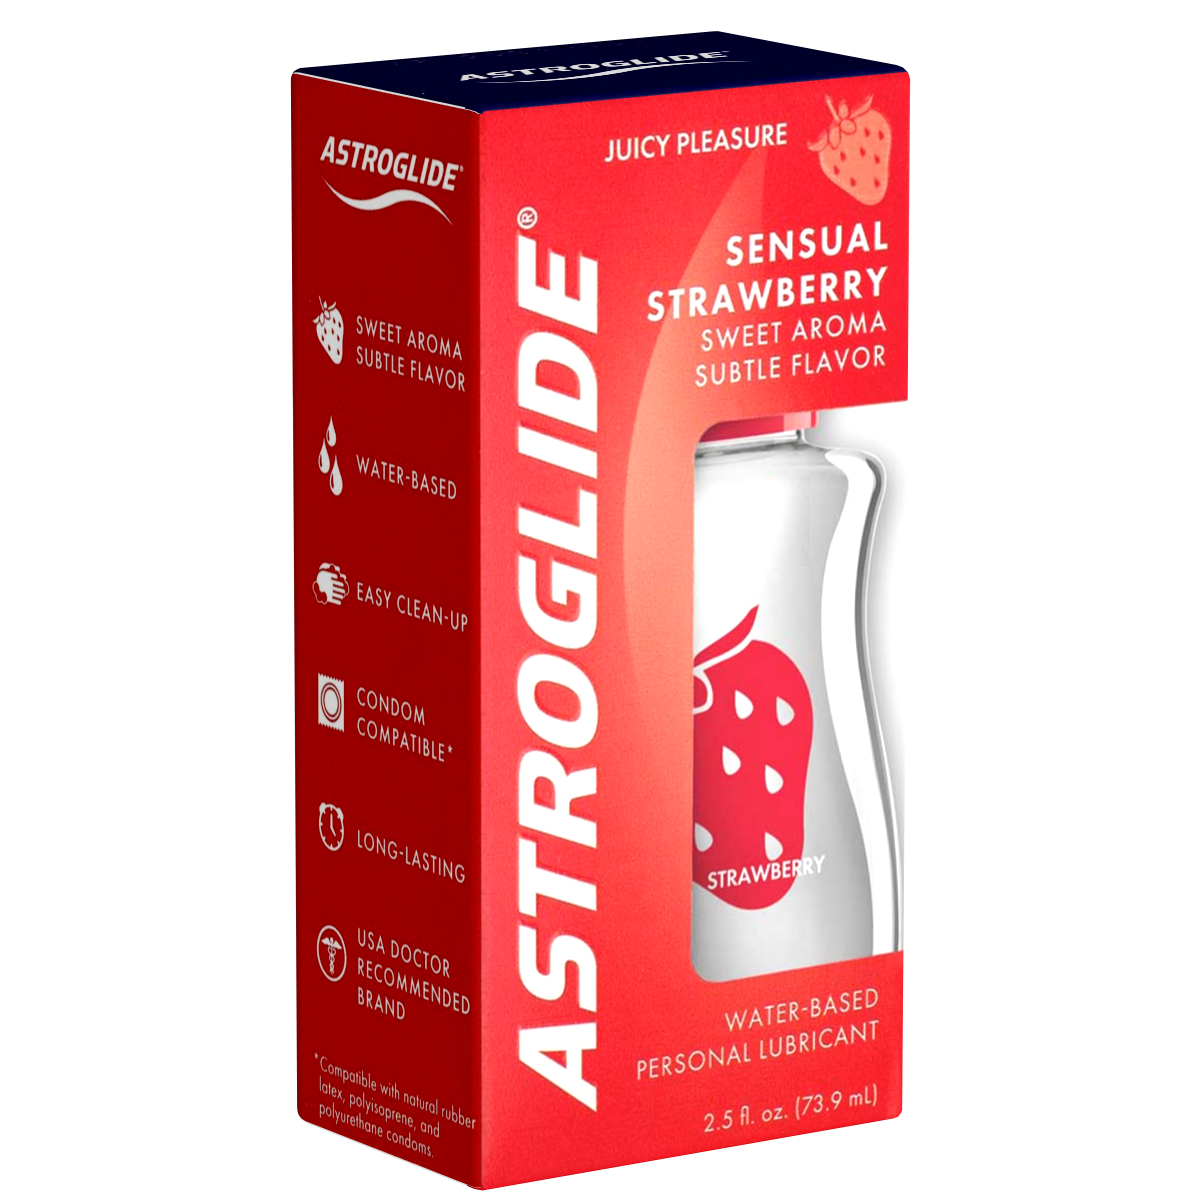 Astroglide «Sensual Strawberry» 74ml fruity and sweet lubricant with strawberry taste - water-based and suitable for vegans